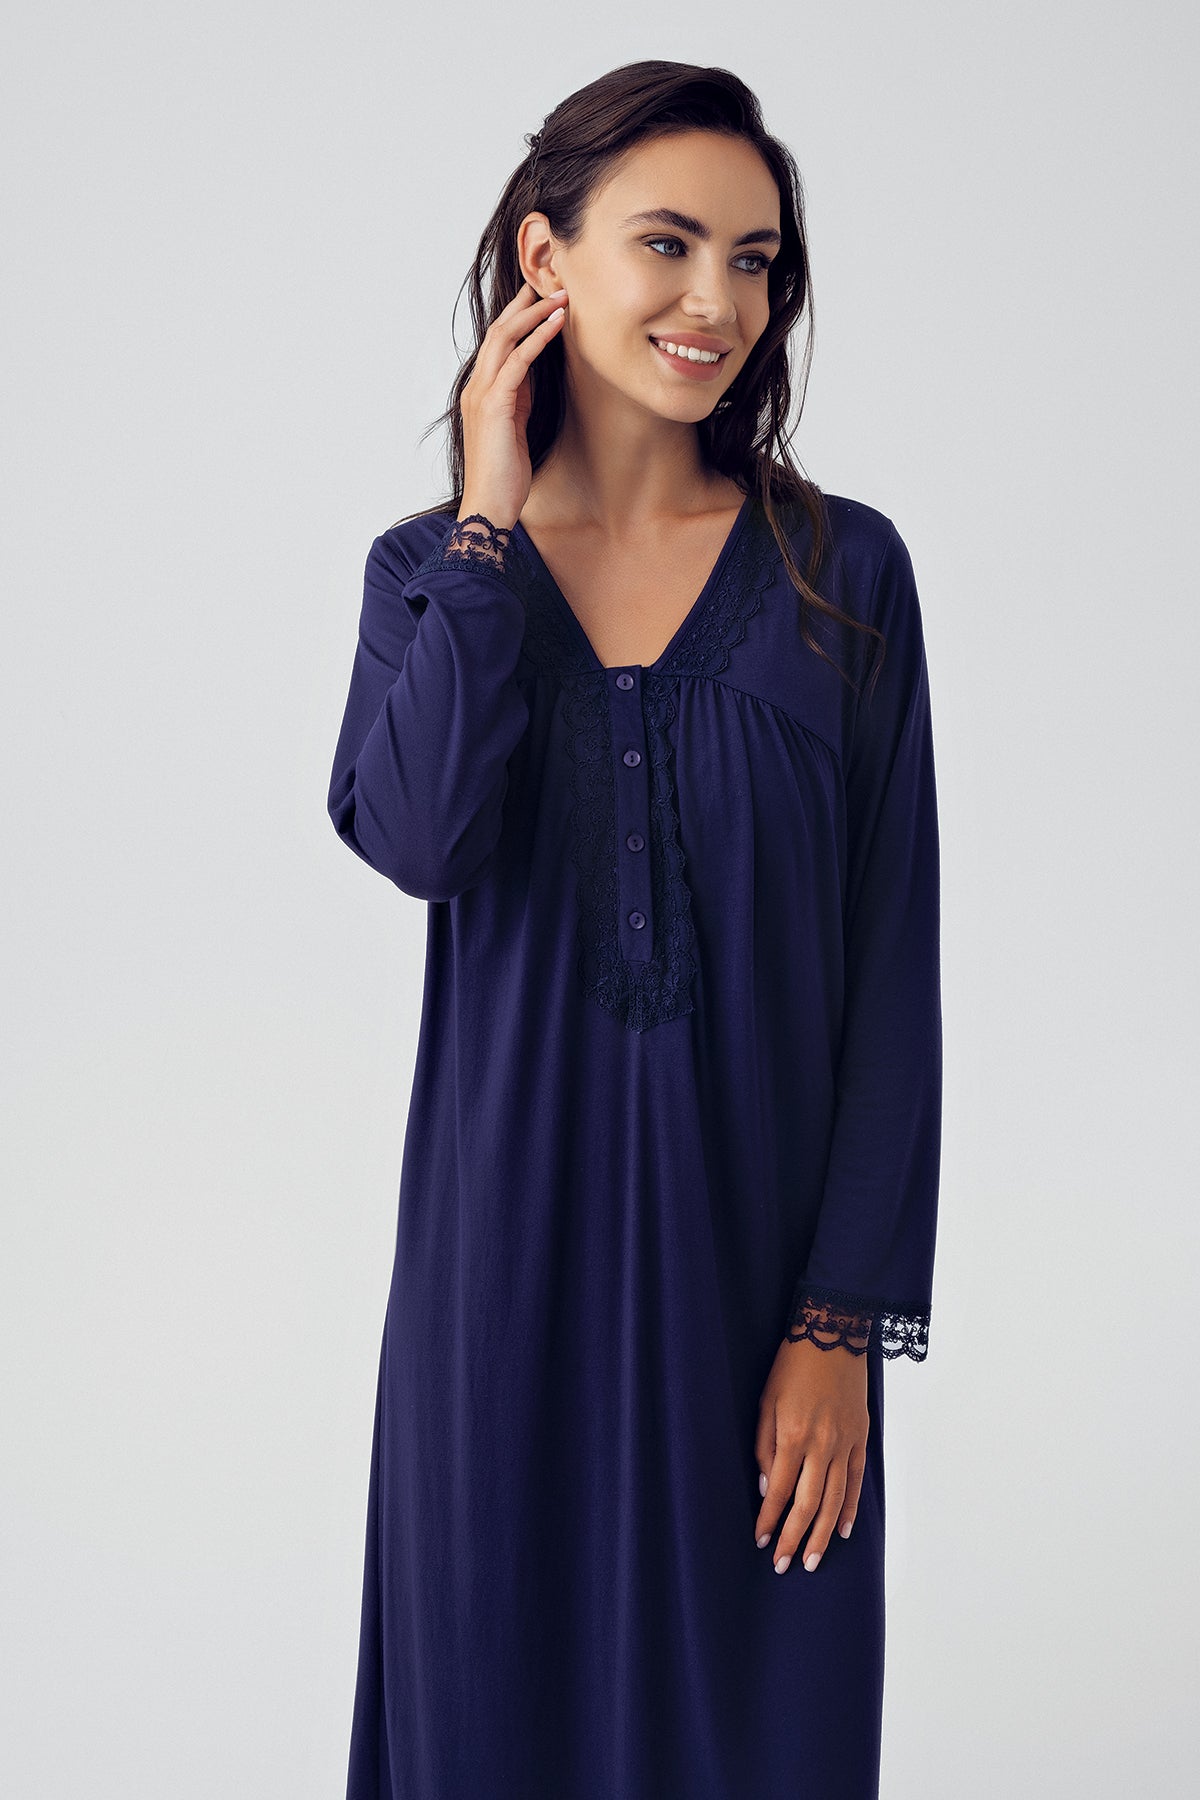 Lace Sleeve Plus Size Maternity & Nursing Nightgown Navy Blue - 15120